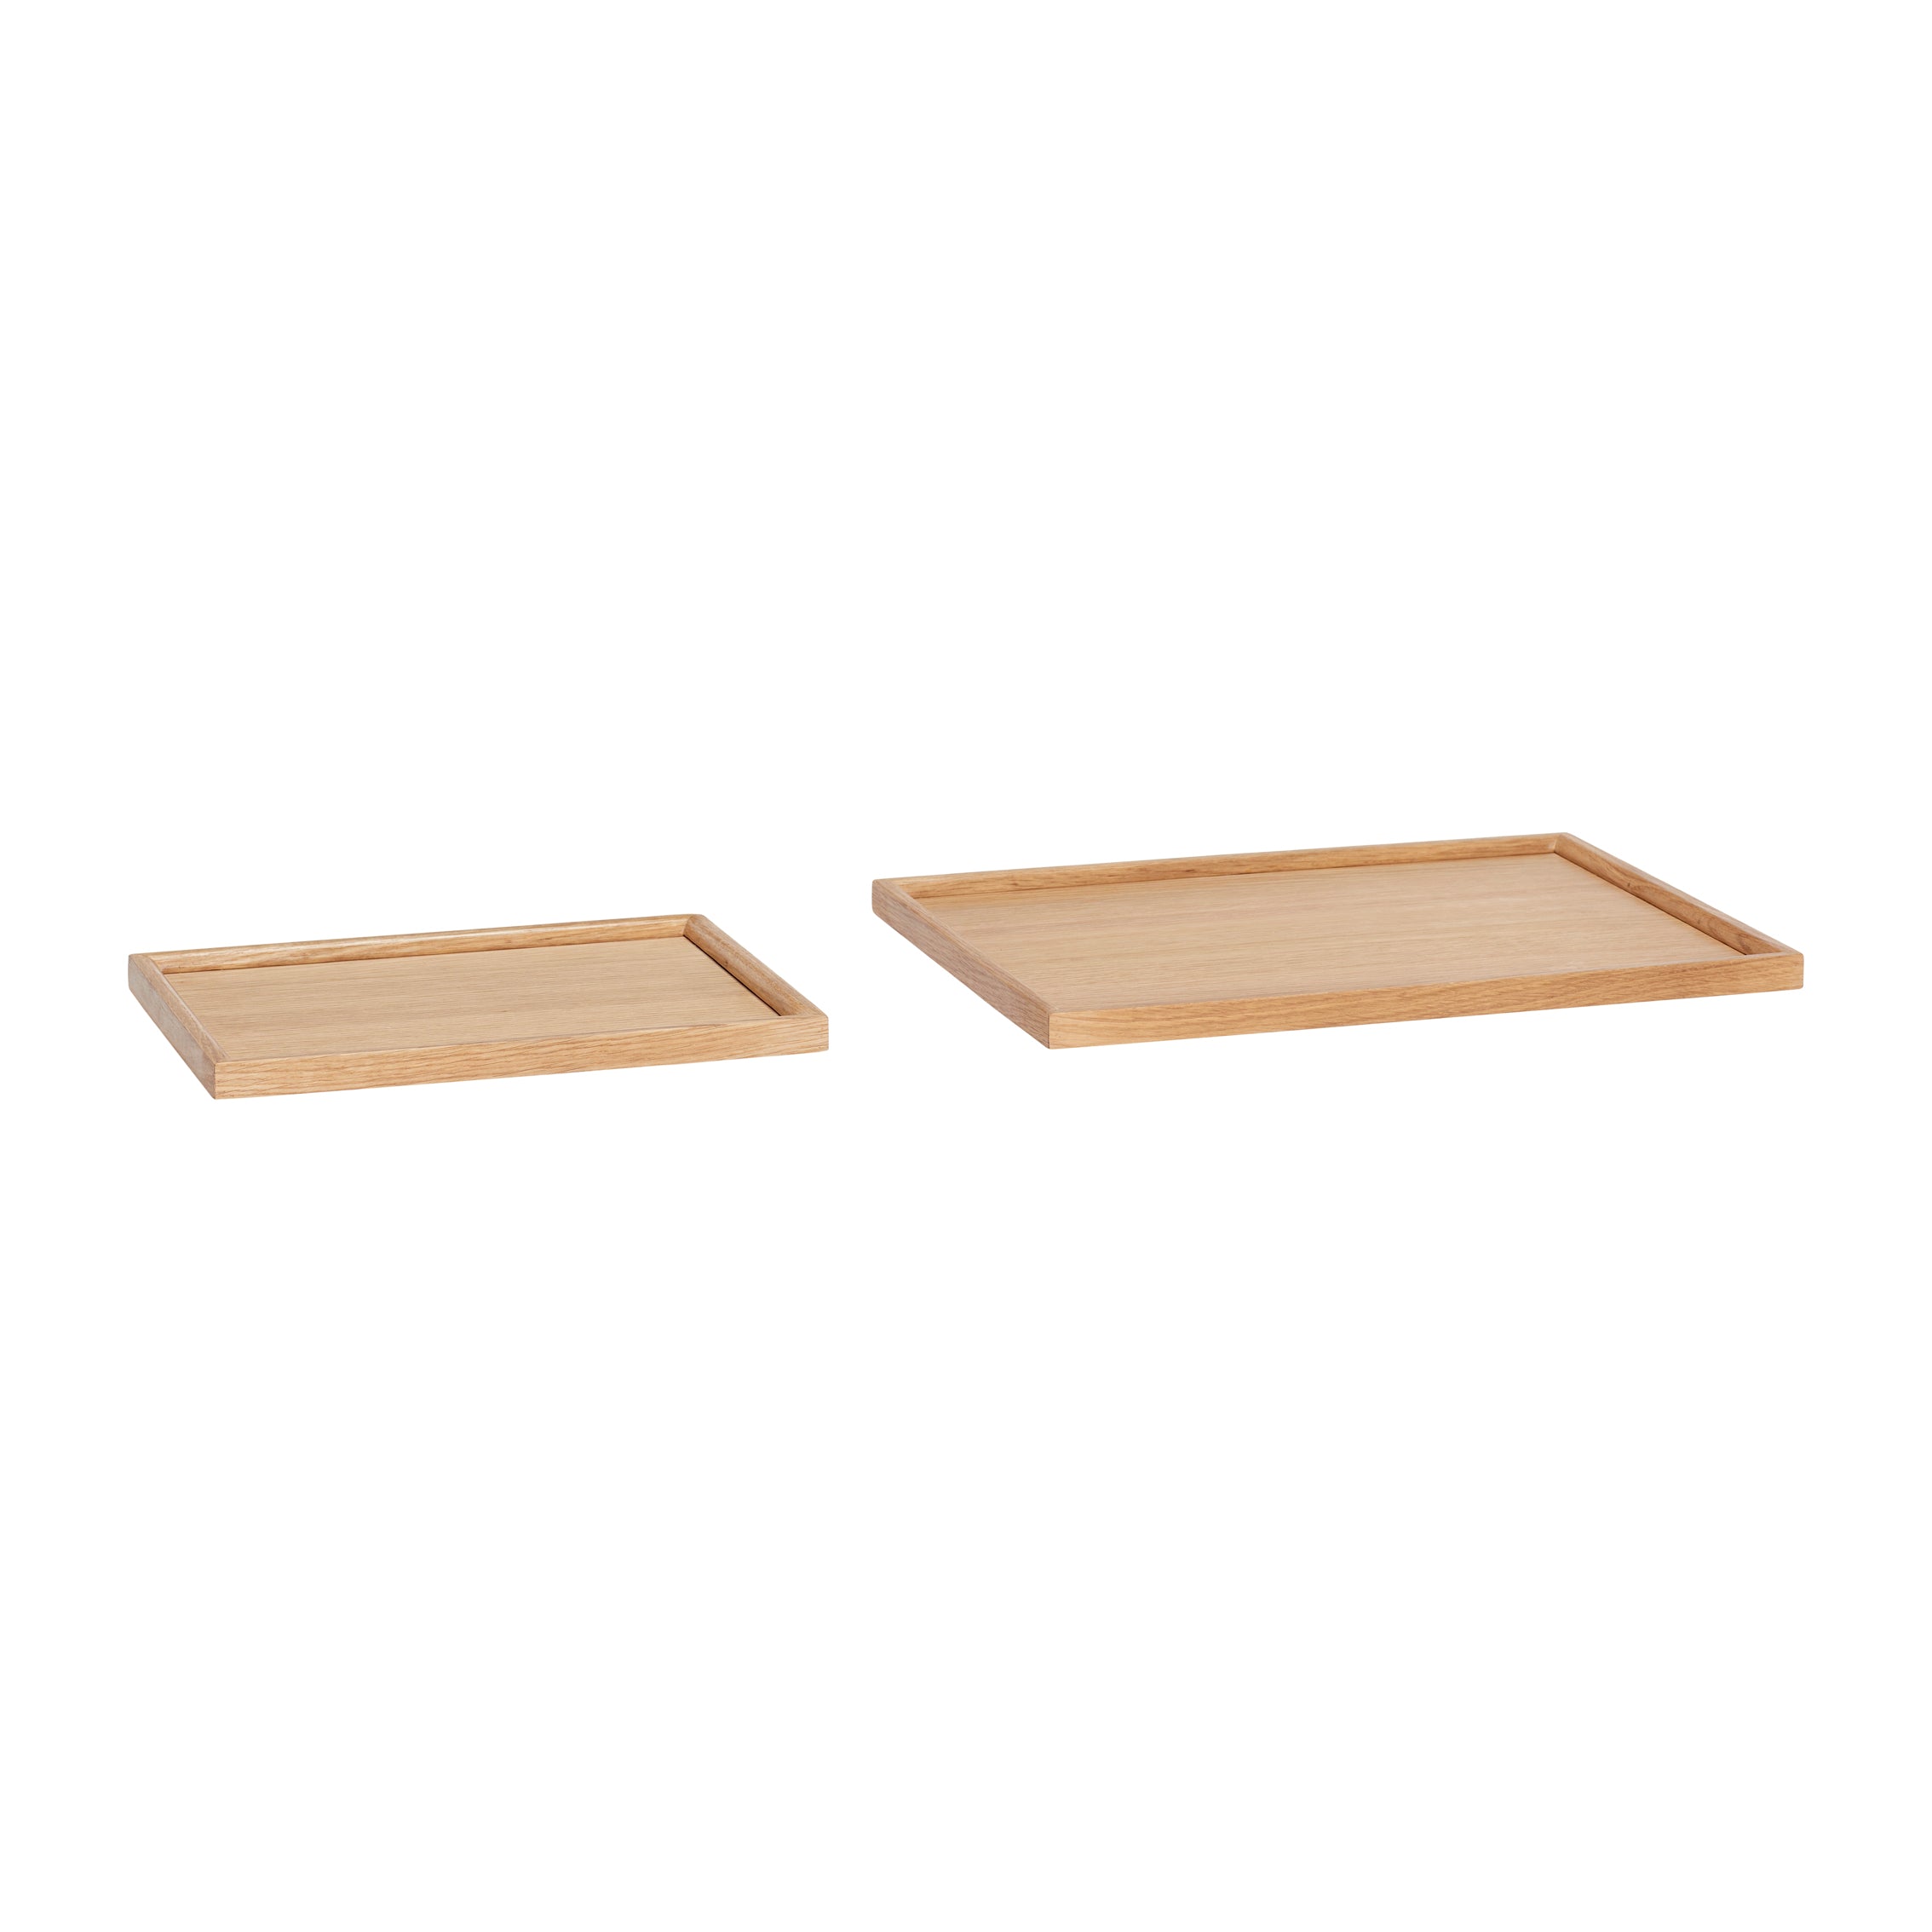 Rectangular Serving Tray Made of Oak Wood Small Size